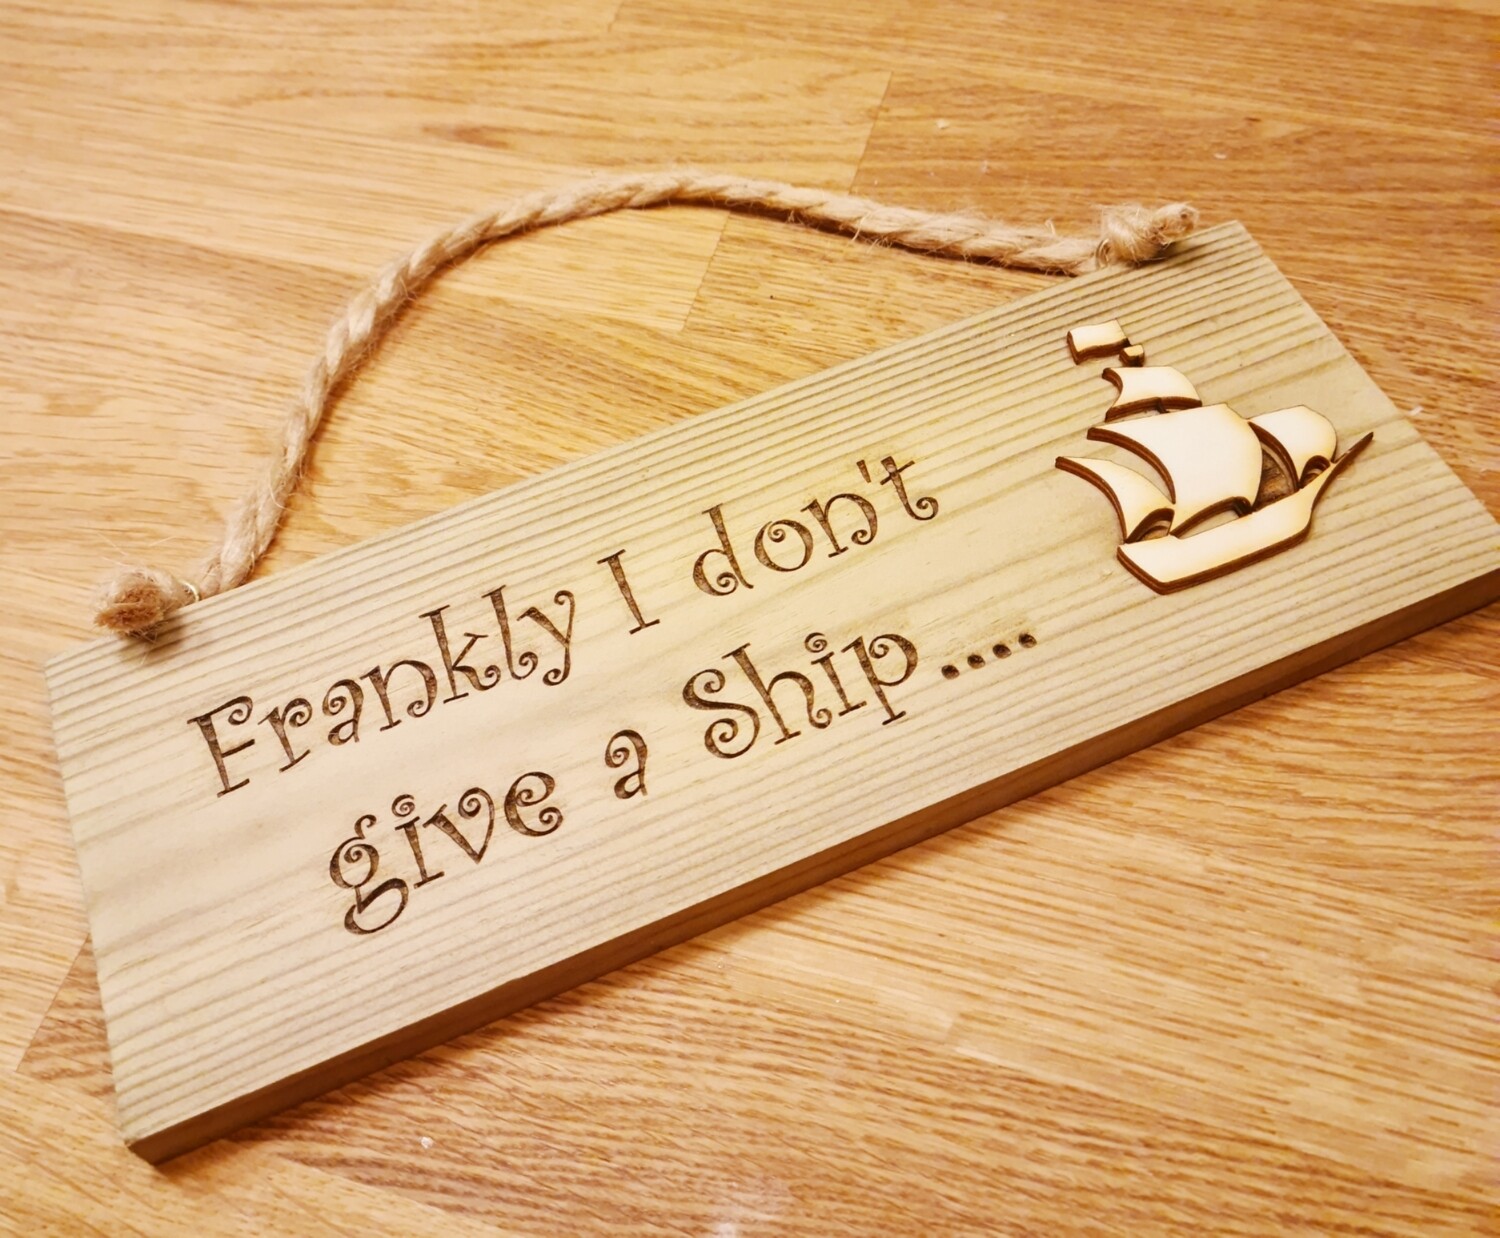 Frankly I dont't give a ship, Hanging Sign